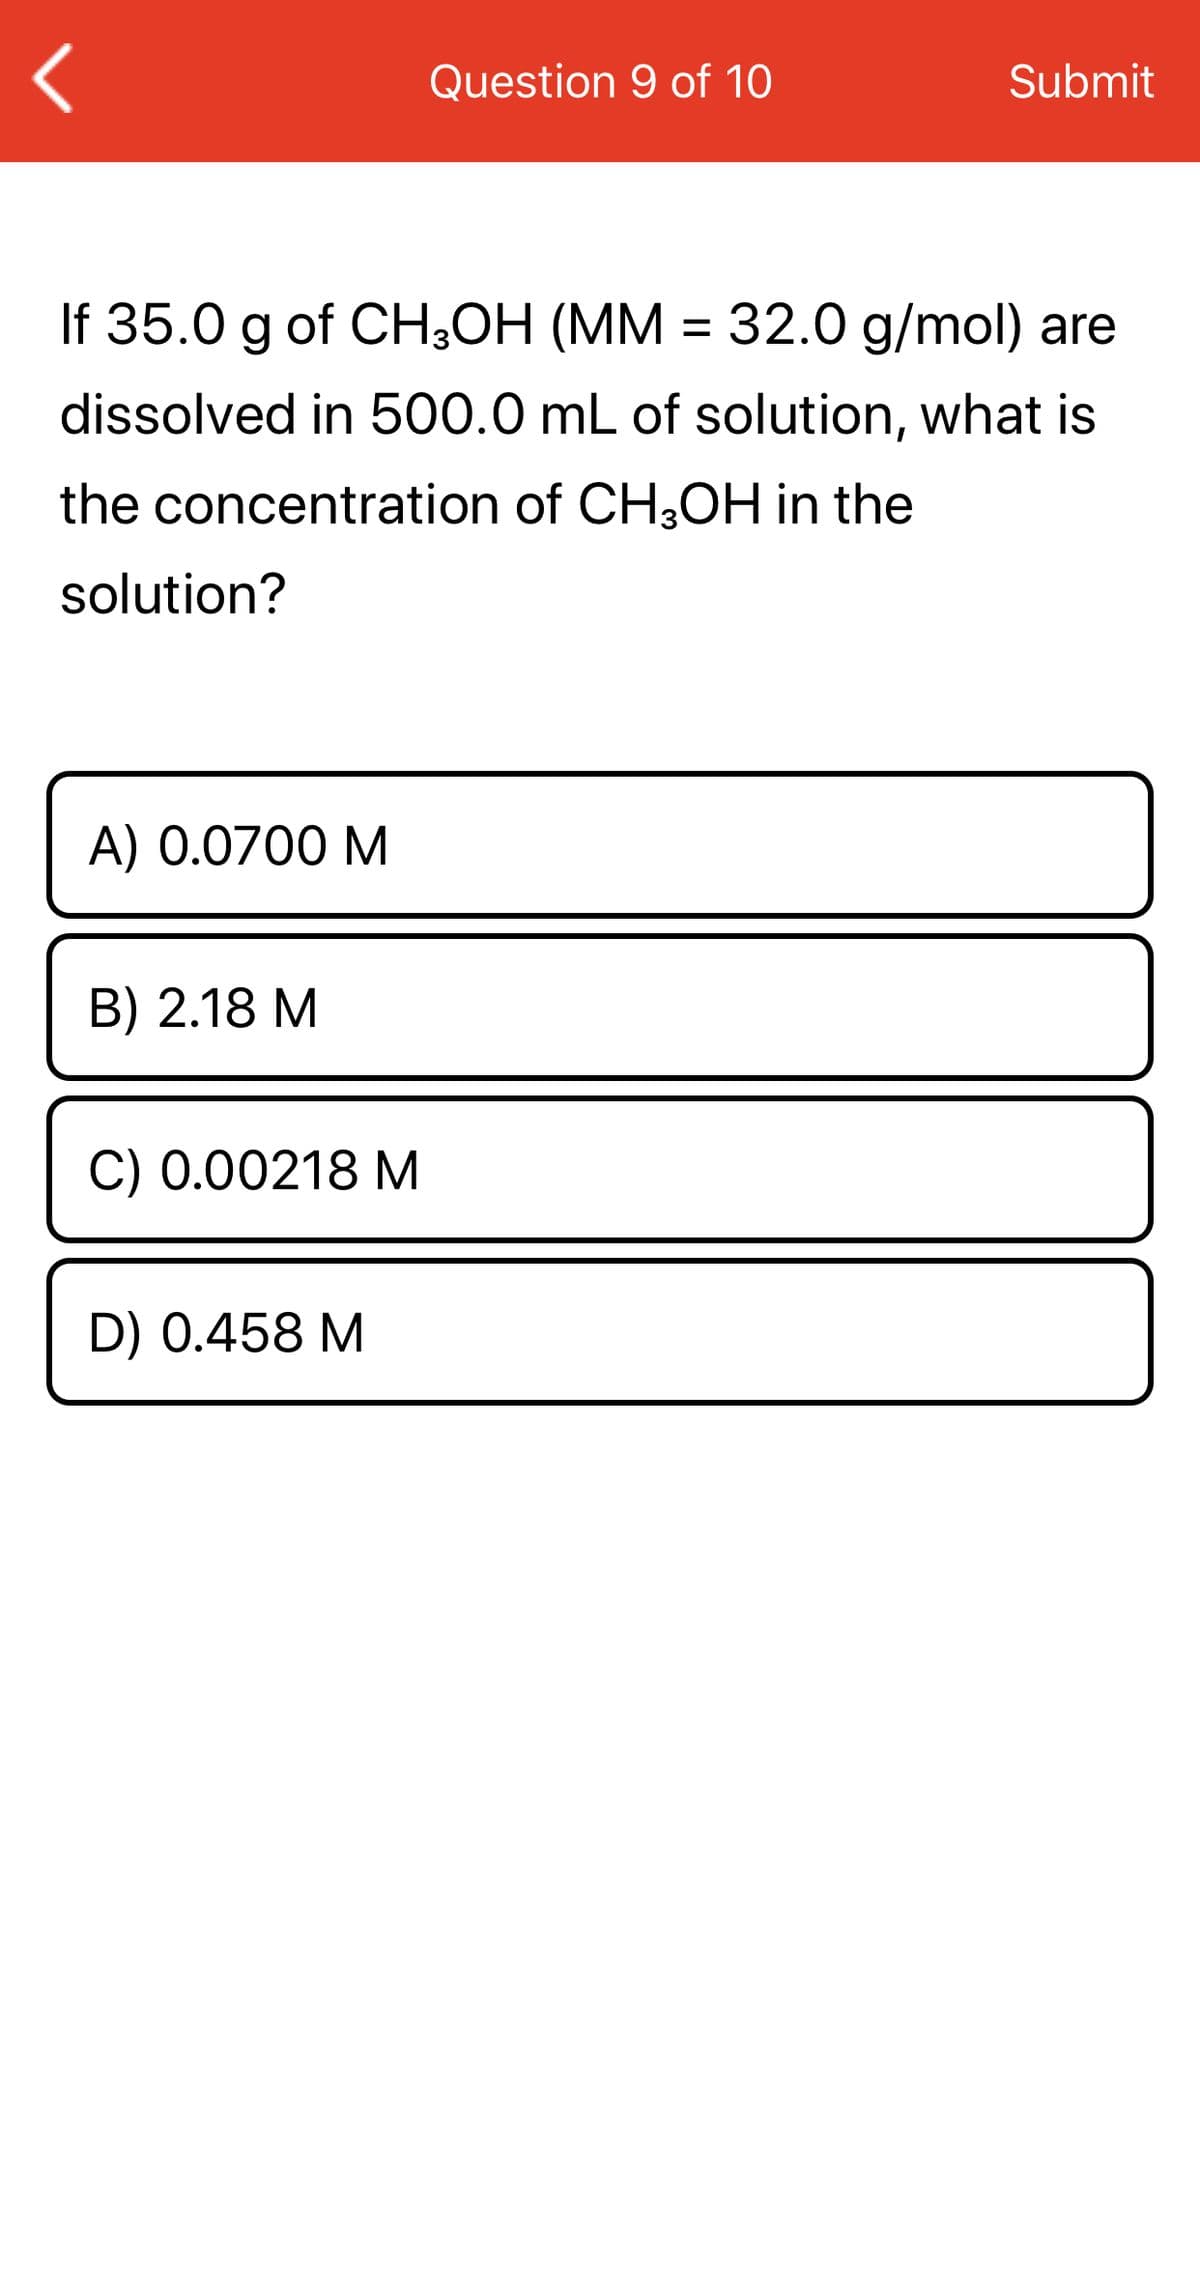 Question 9 of 10
Submit
If 35.0 g of CH3OH (MM = 32.0 g/mol) are
dissolved in 500.0 mL of solution, what is
the concentration of CH3OH in the
solution?
A) 0.0700 M
B) 2.18 M
C) 0.00218 M
D) 0.458 M
